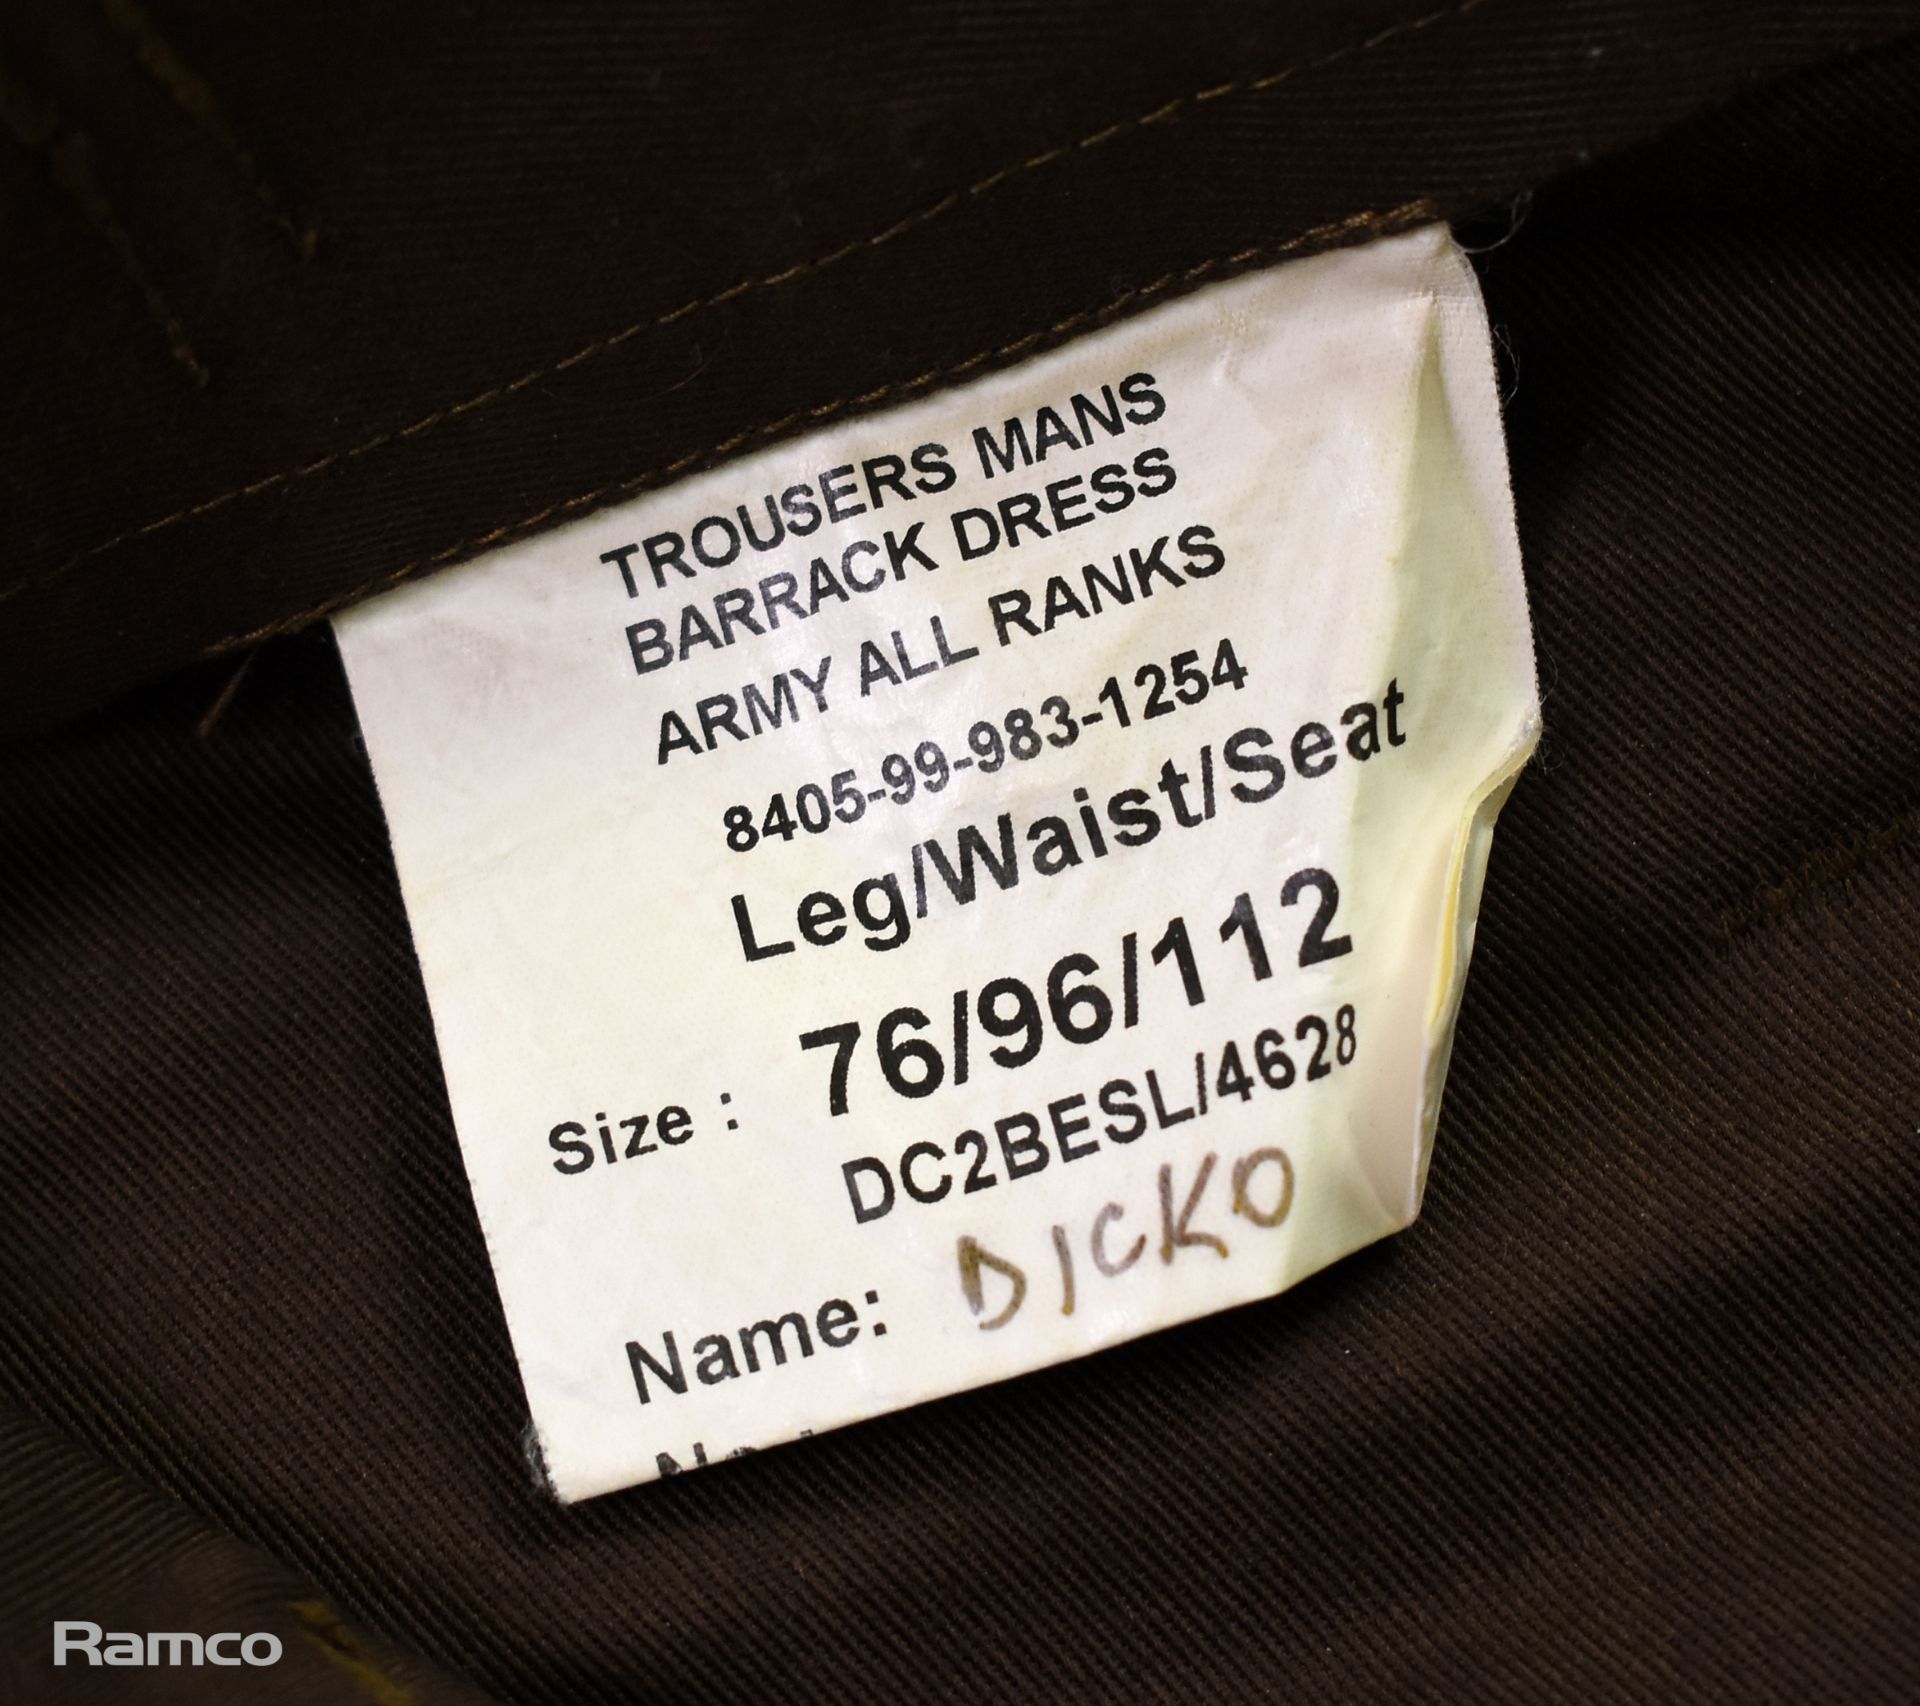 40x British Army No. 2 Dress trousers - mixed grades and sizes - Image 5 of 11